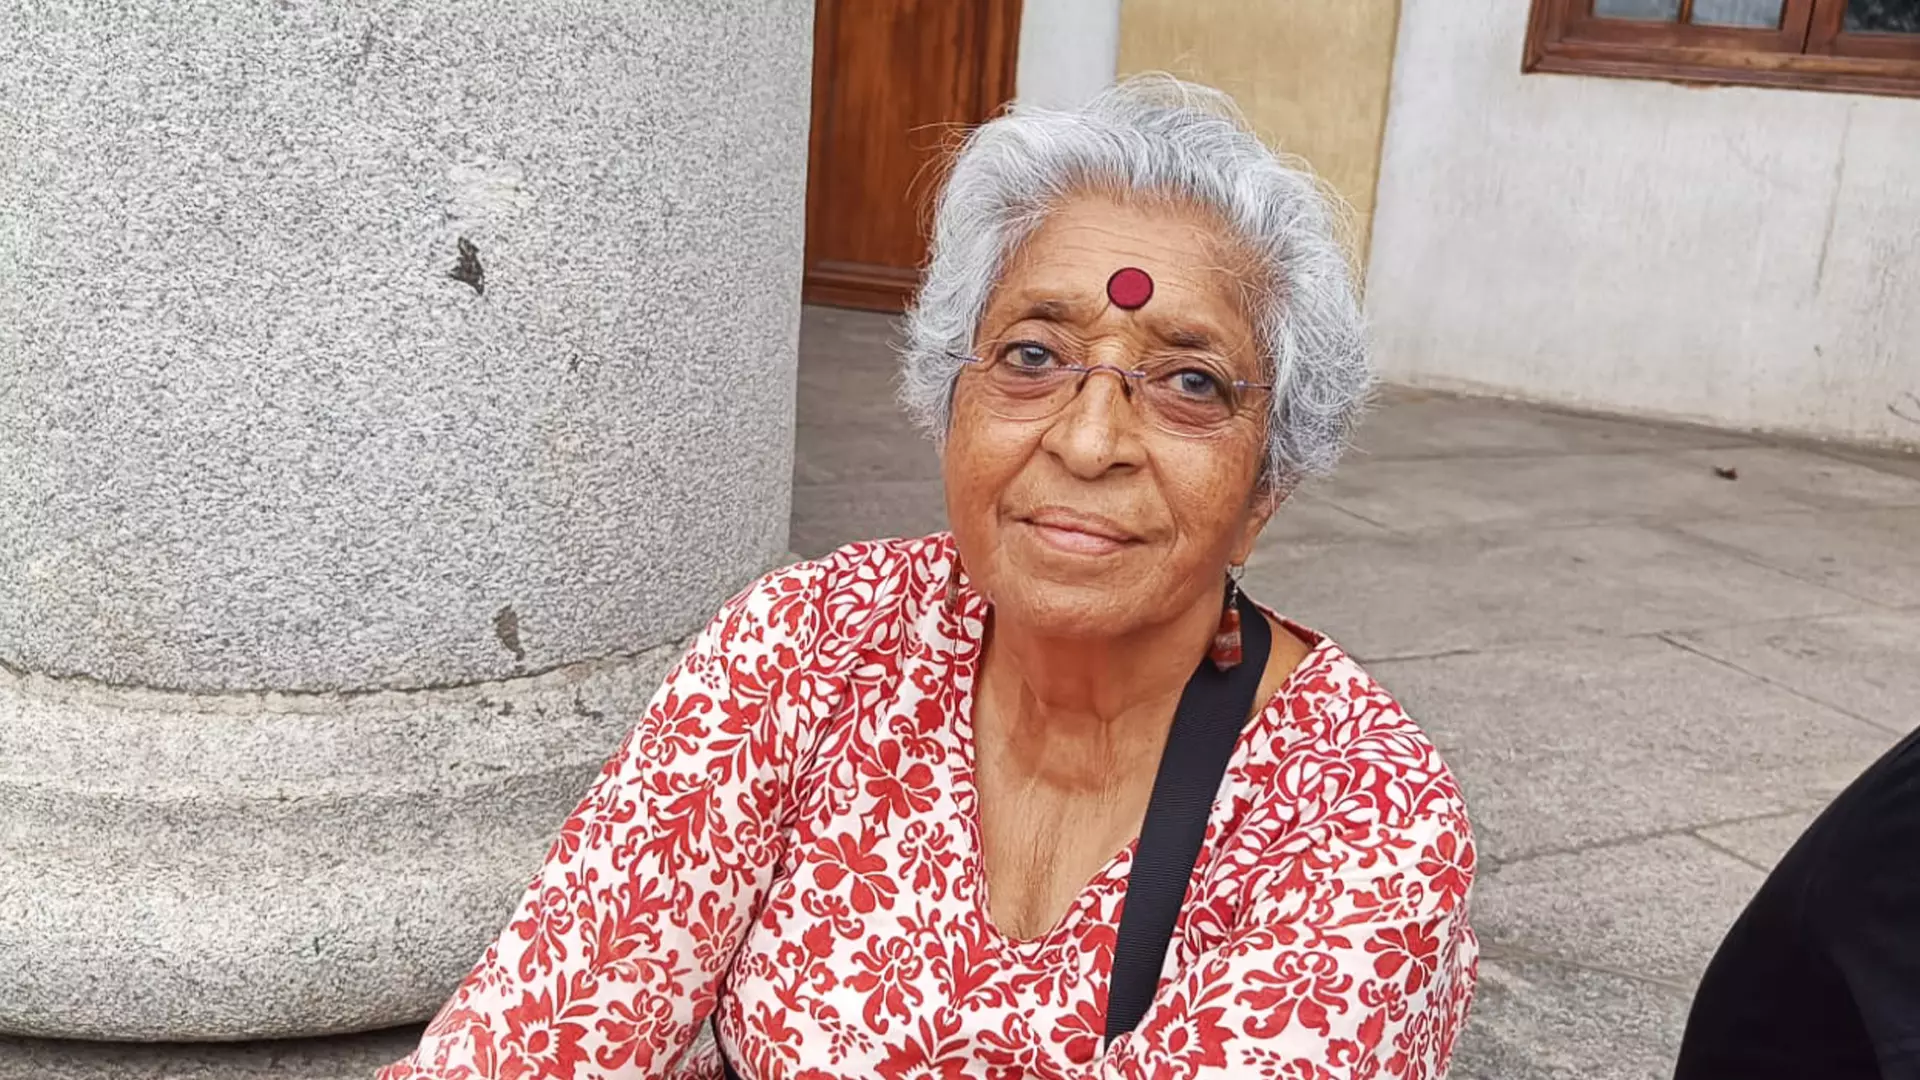 Eighty-two-year-old Lalitha Matthew, one of the protestors, poses for The Federal.